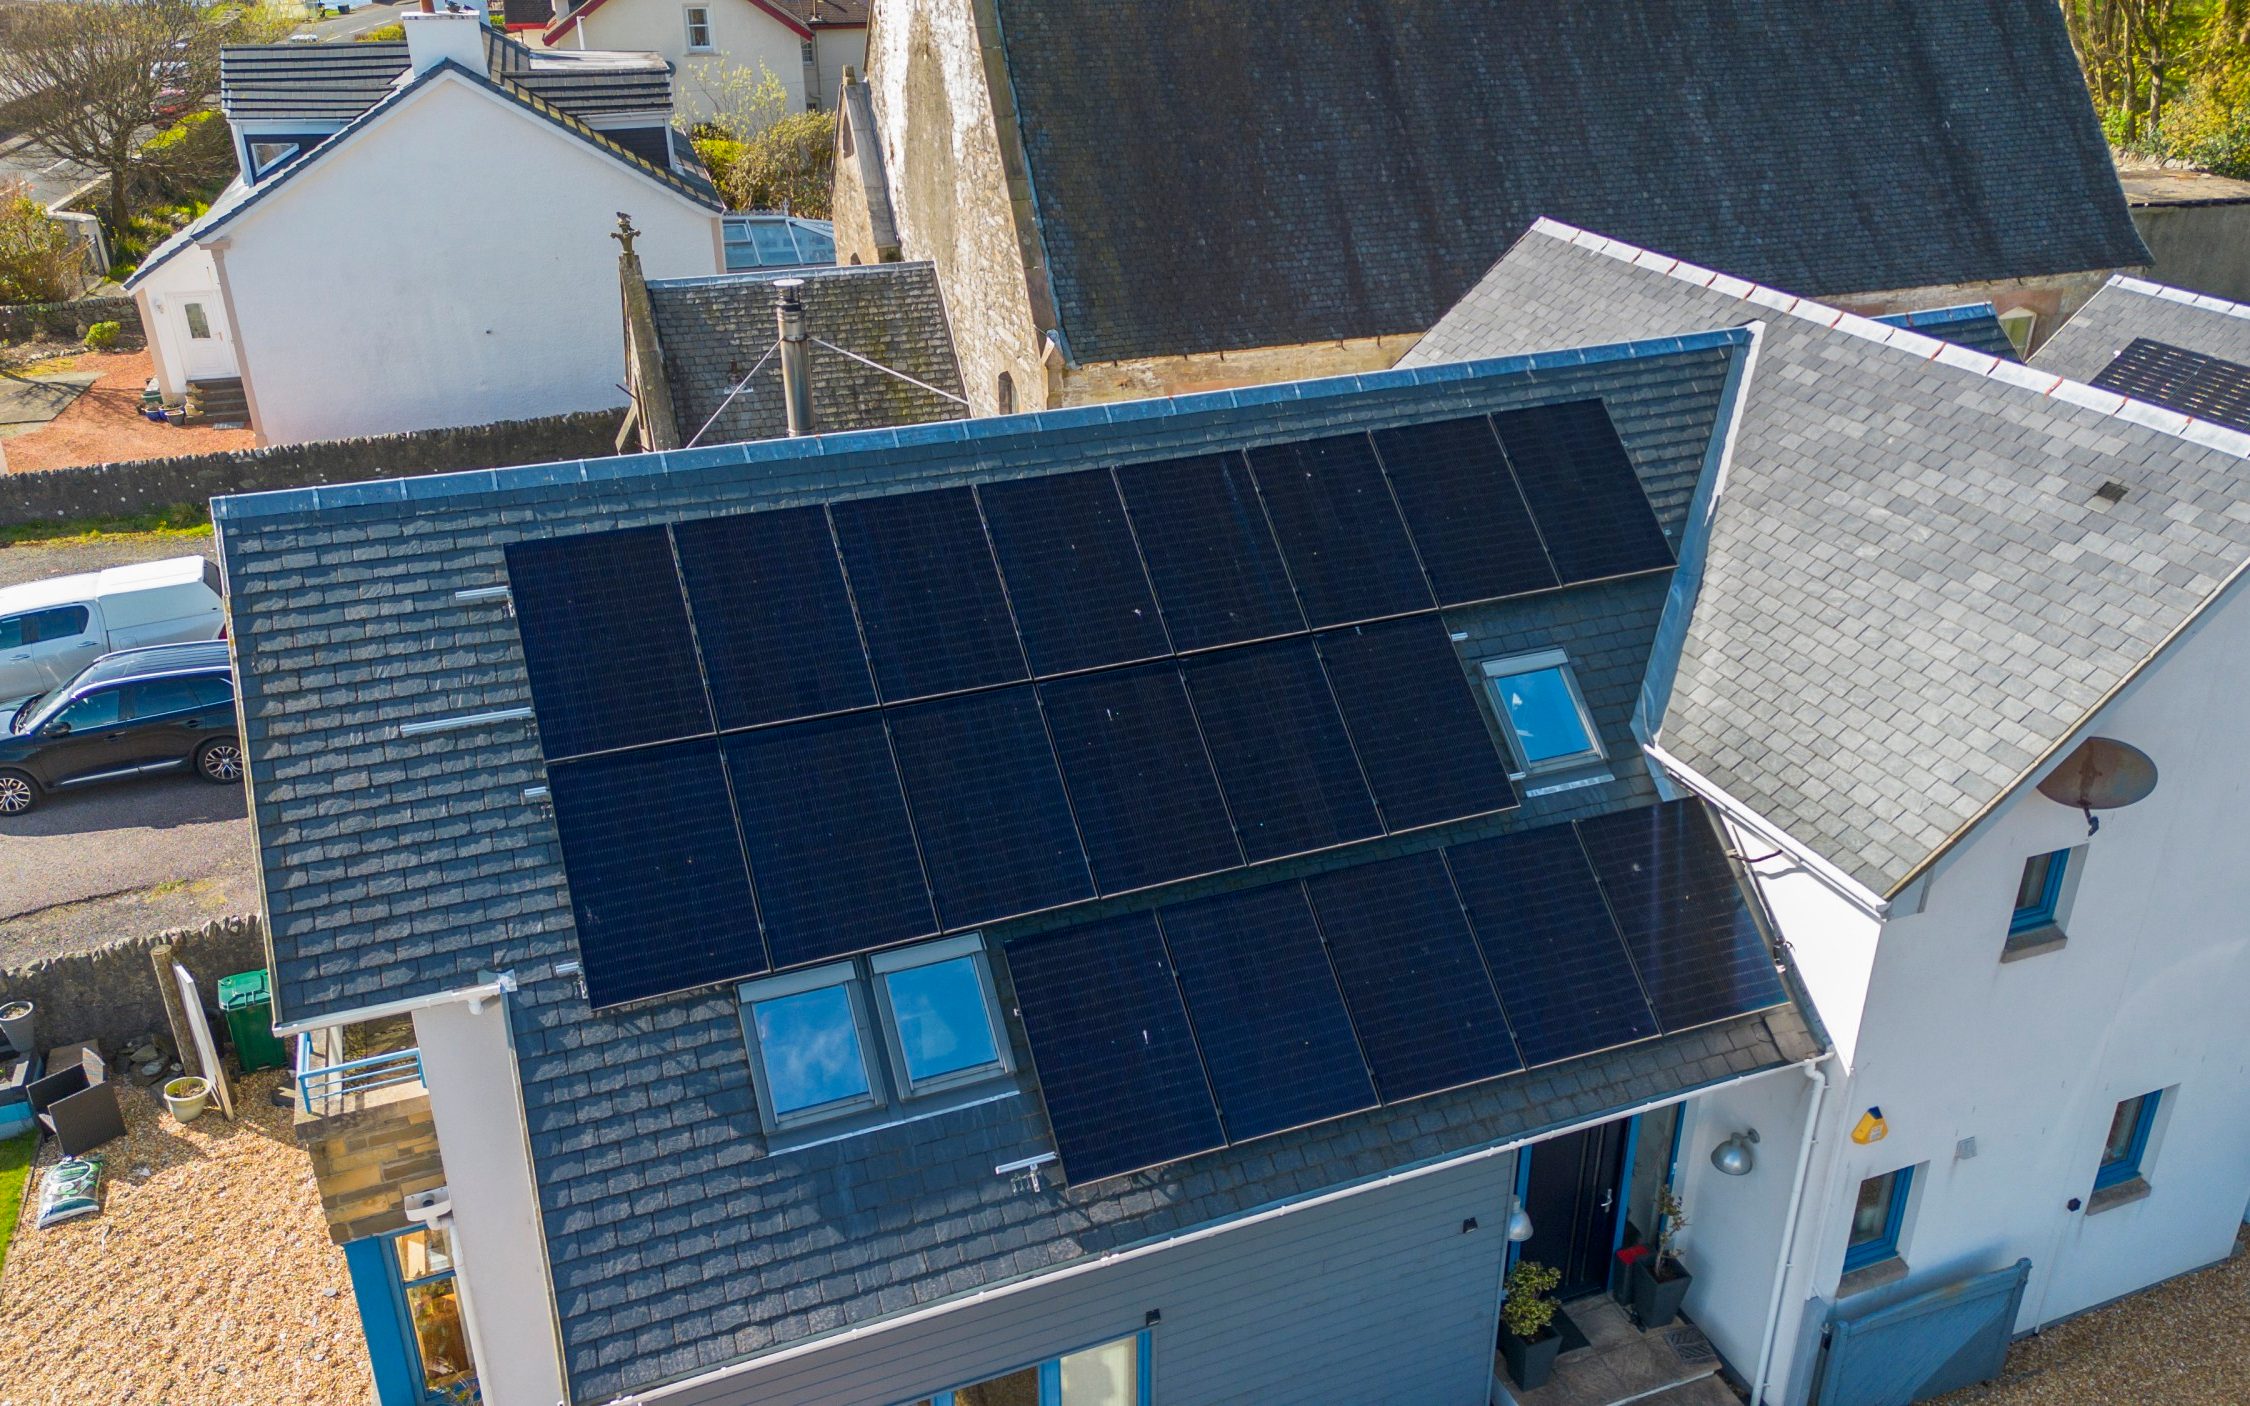 ‘i spent £25,000 on solar power for my home – but i’ll make the money back within 10 years’